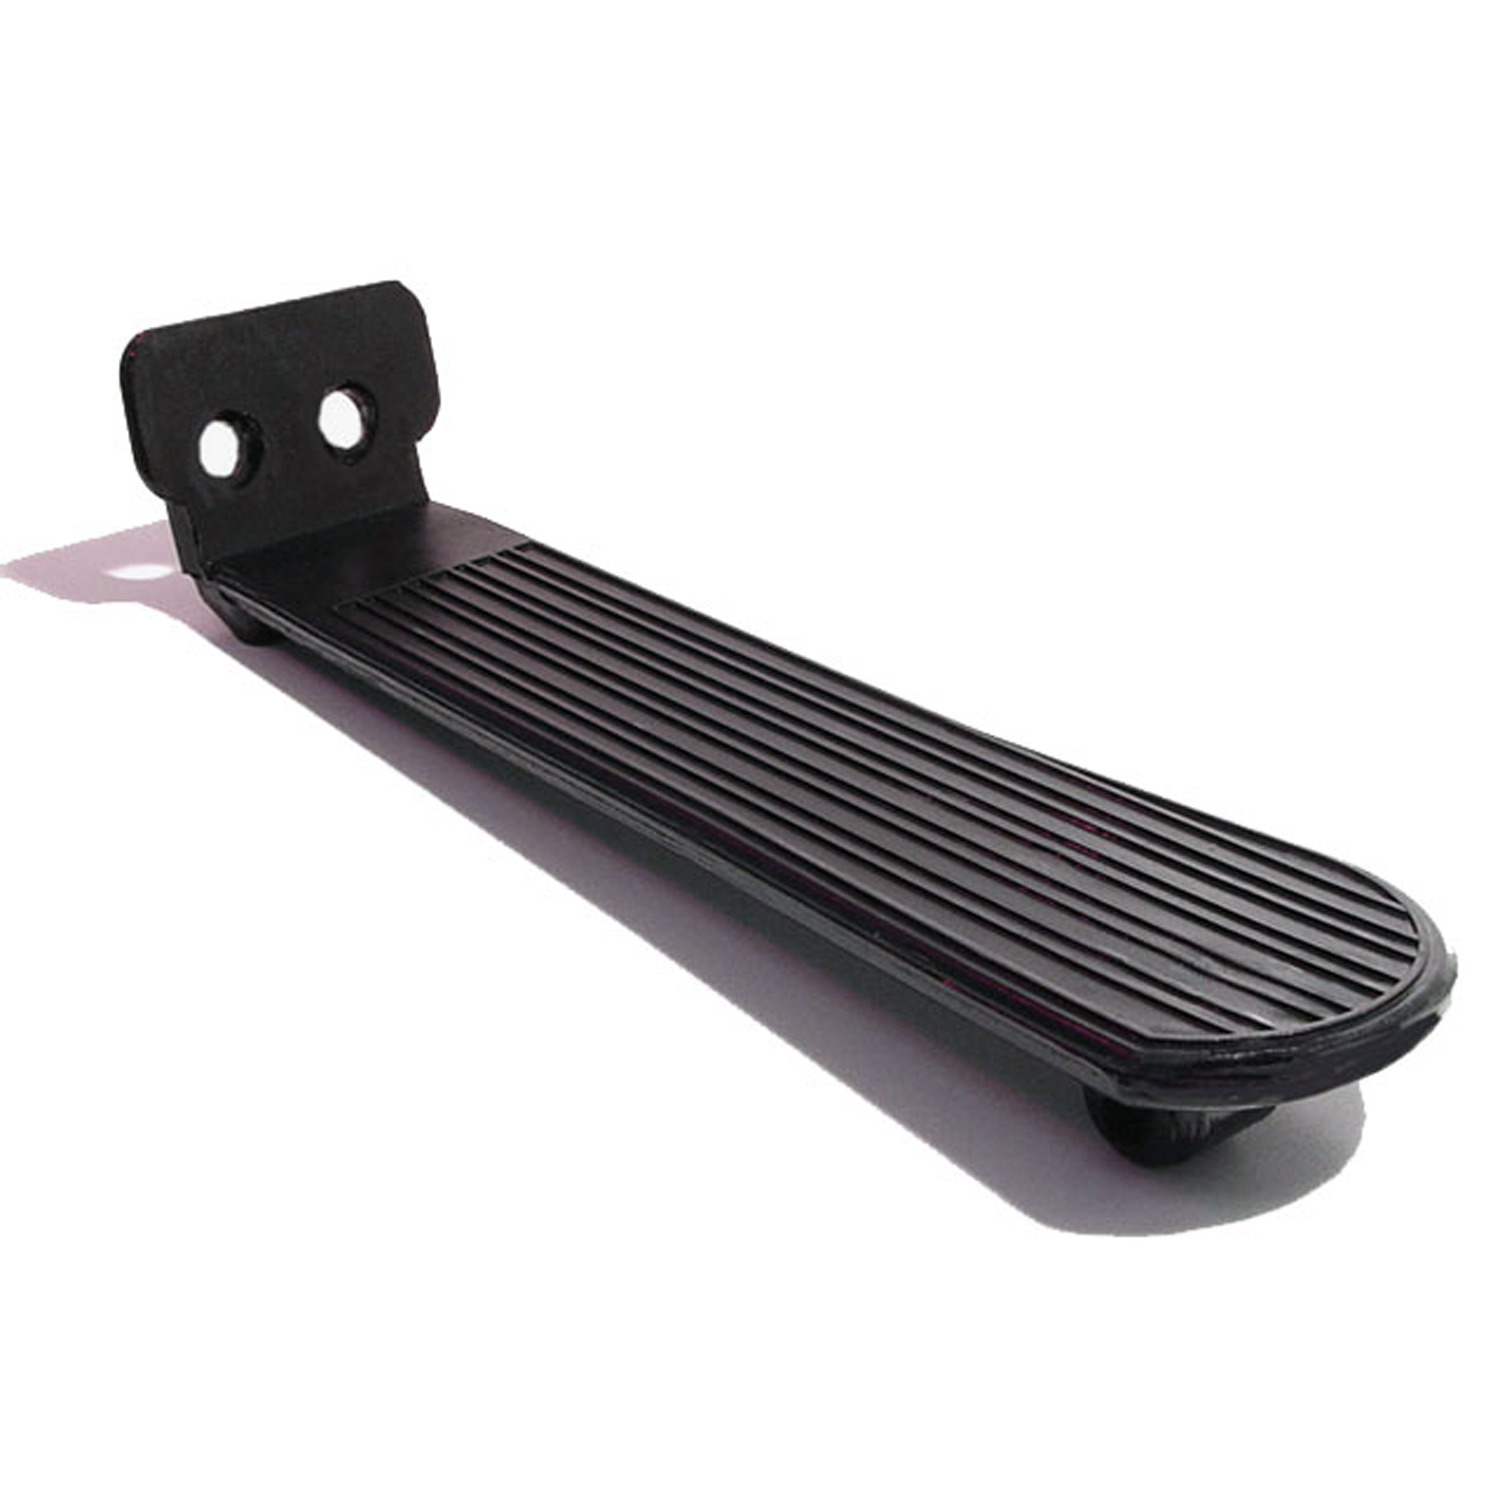 1939 Buick Limited Series 90 Accelerator Pedal Pad.  Made with steel core like original-AP 29-C